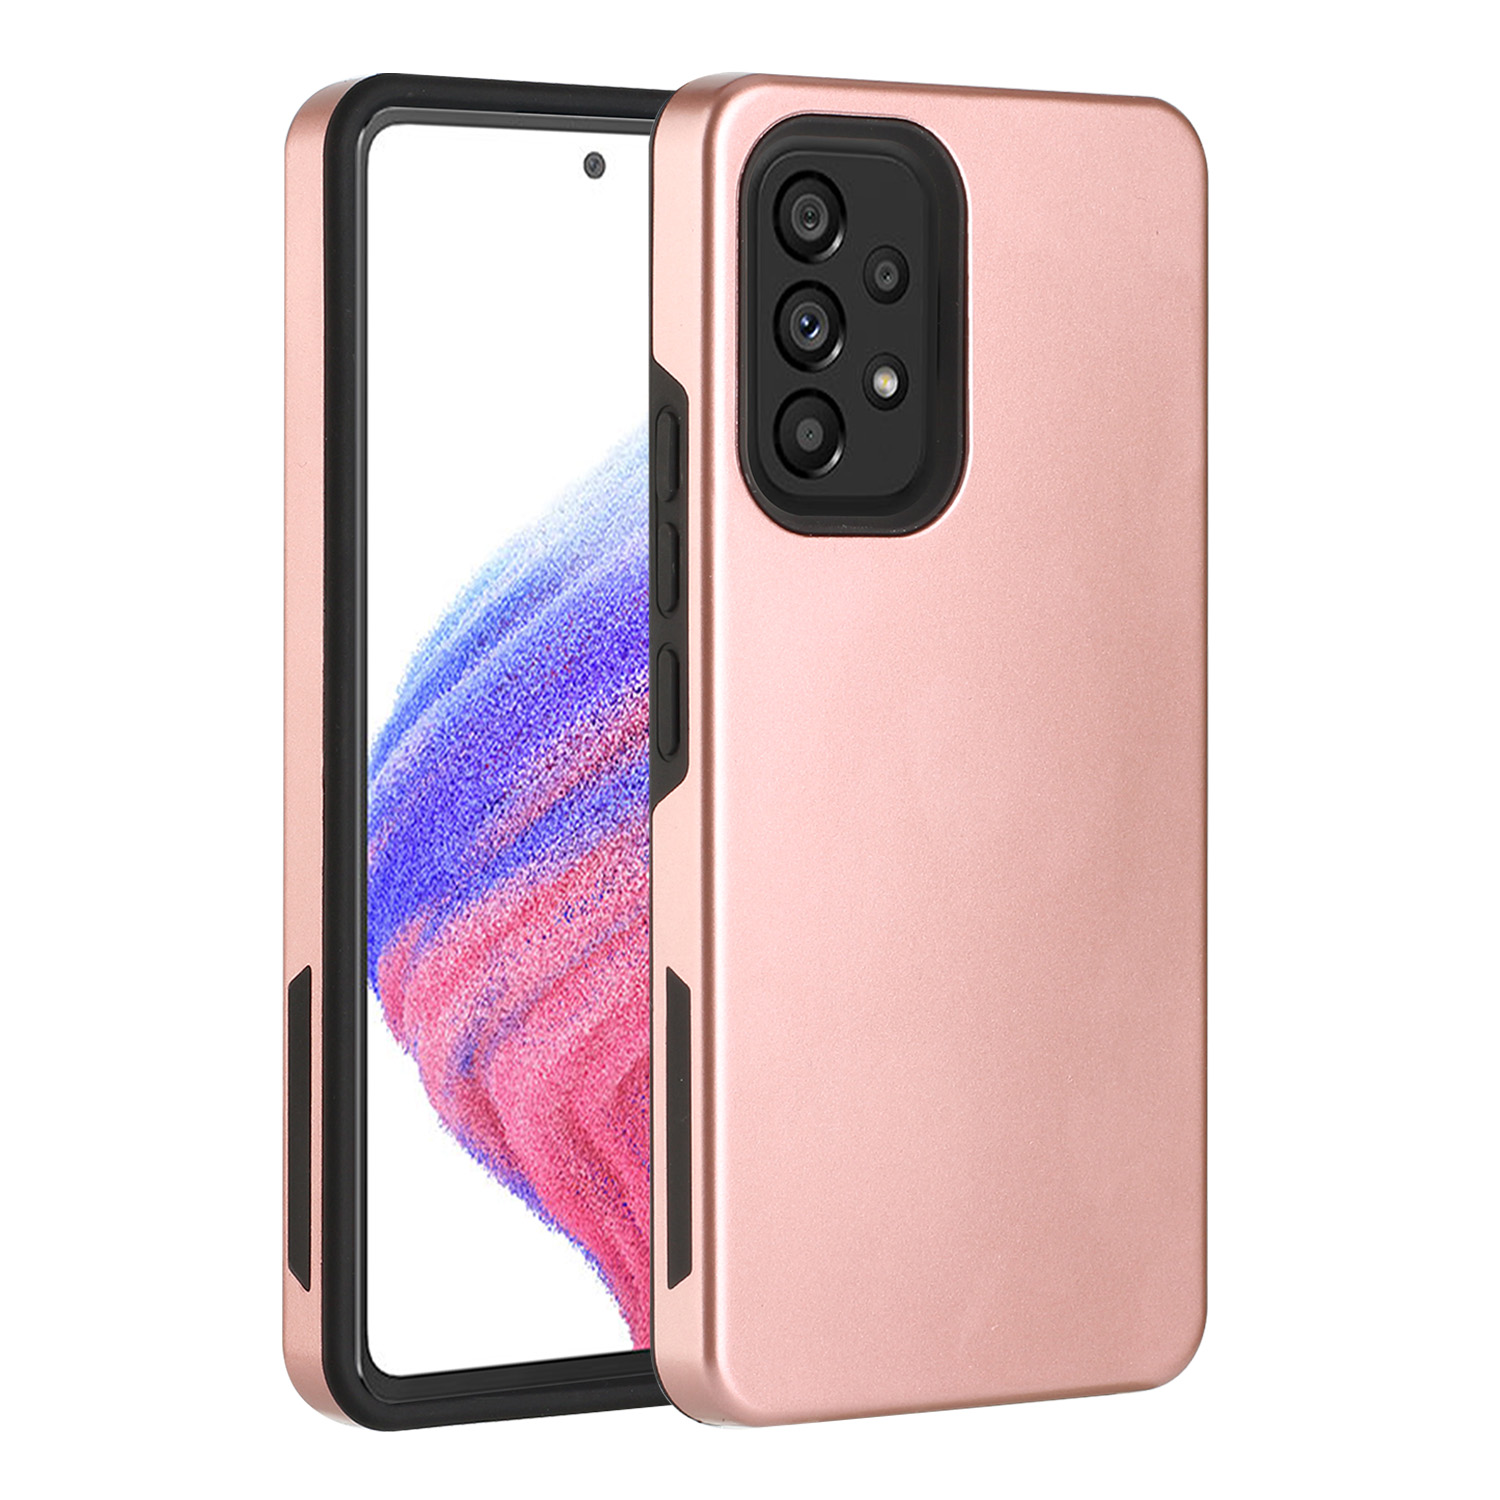 Dual Layer Armor Defender Hybrid Protective Case for Galaxy A53 5G (Rose GOLD)